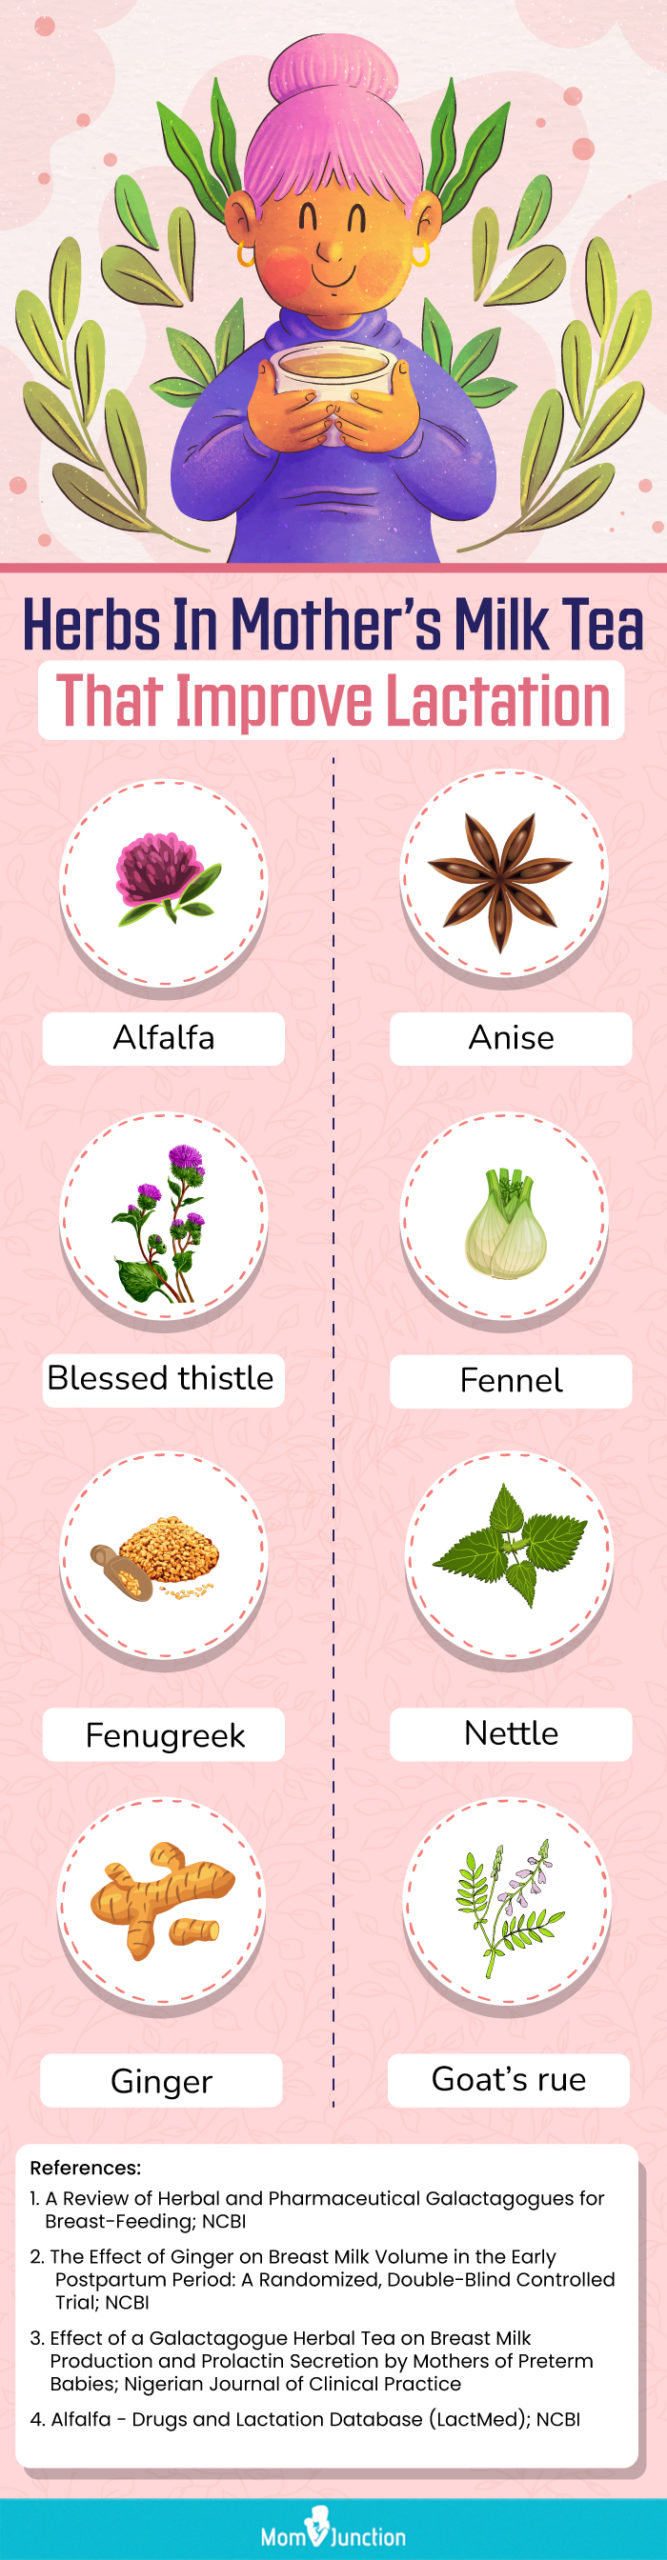 herbs in mother s milk tea that improve lactation (infographic)